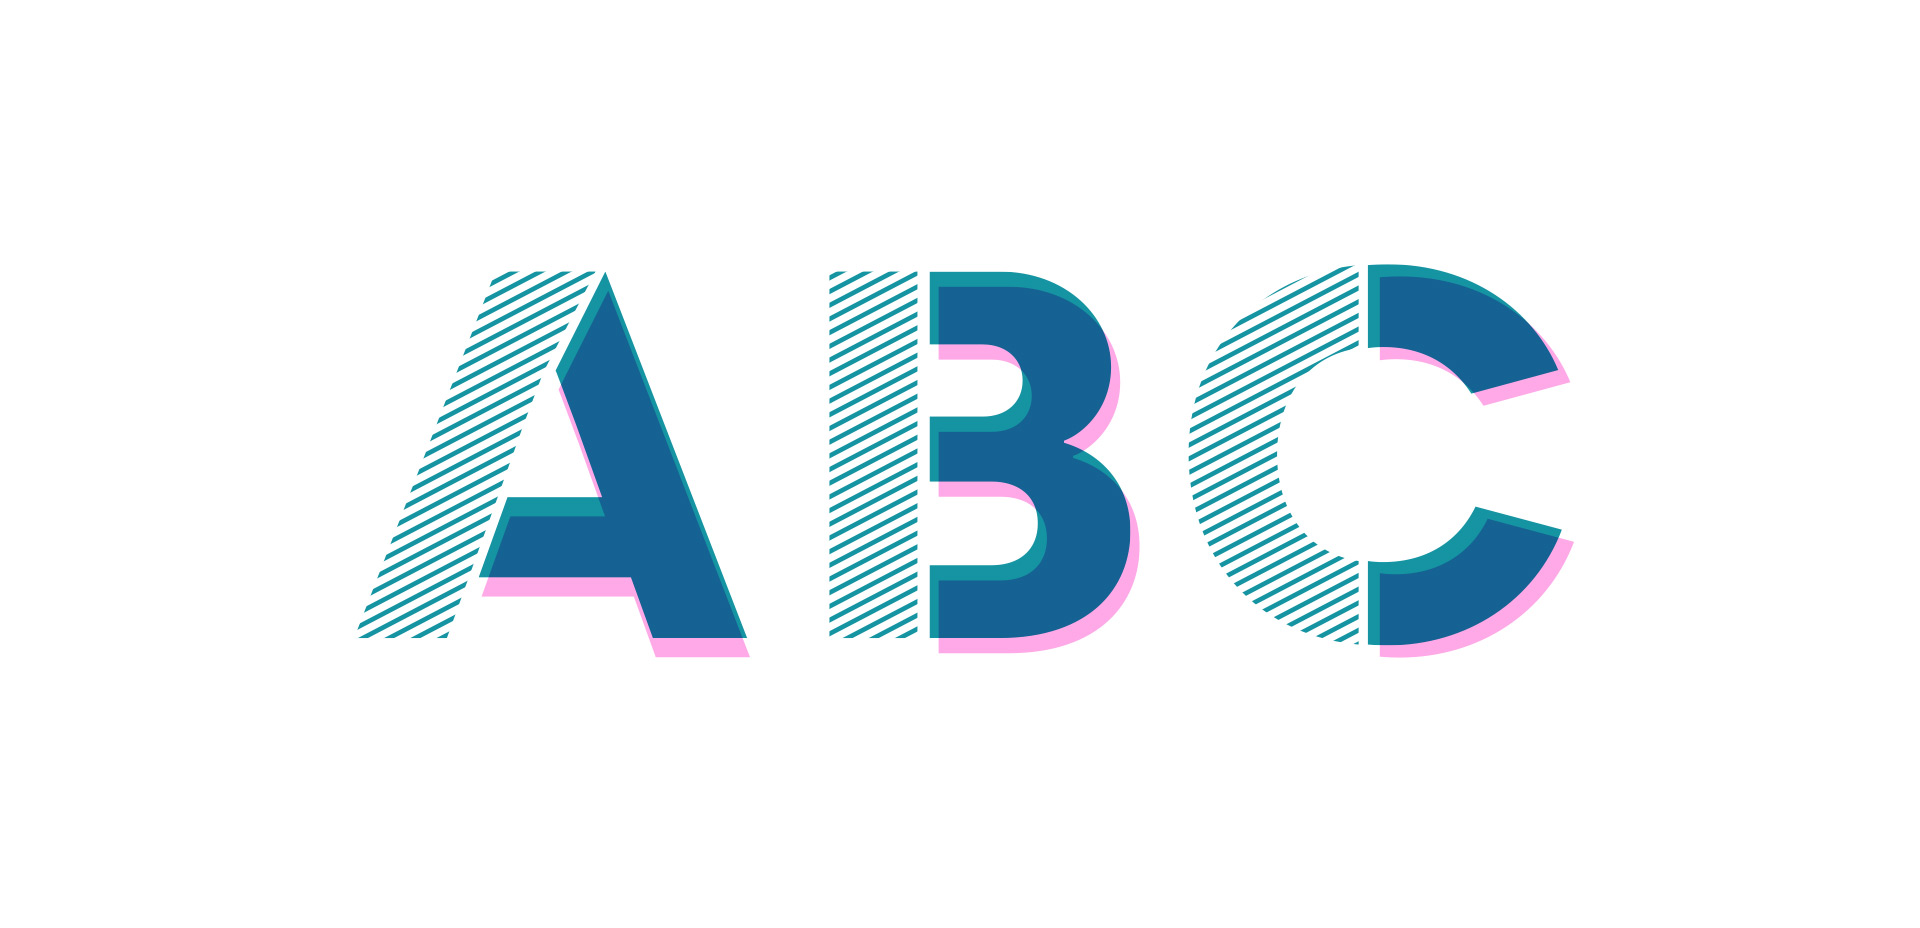 how-to-create-pattern-letters-in-adobe-illustrator-every-tuesday